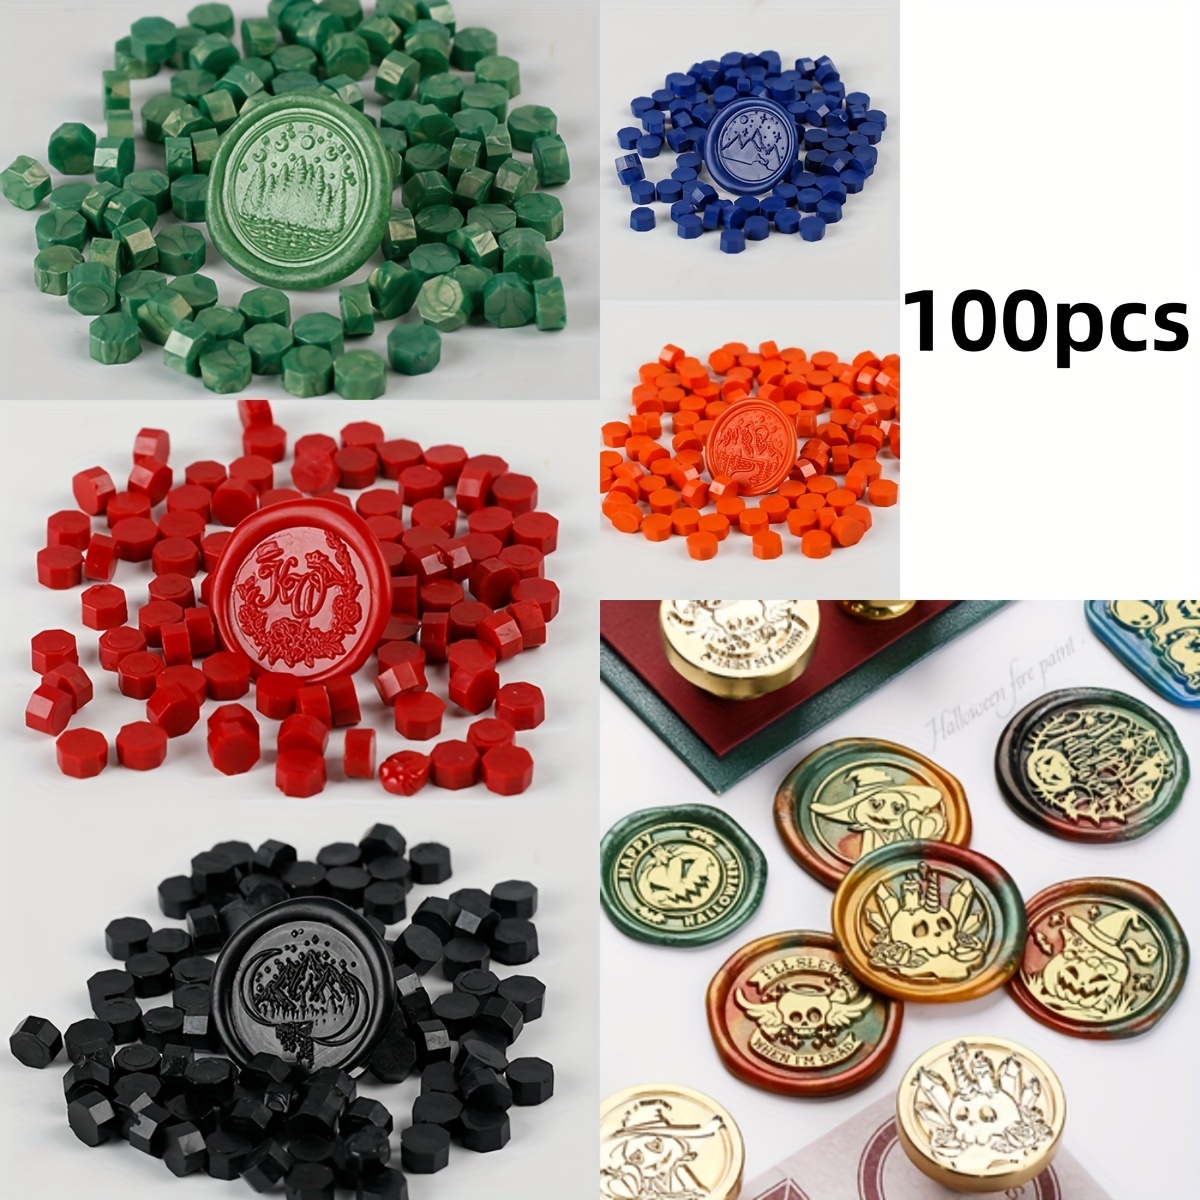 Octagonal Wax Beads Wax Sealing Beads Bulk Wax Seal Beads Vibrant Colors  for Invitations Gift Wrapping